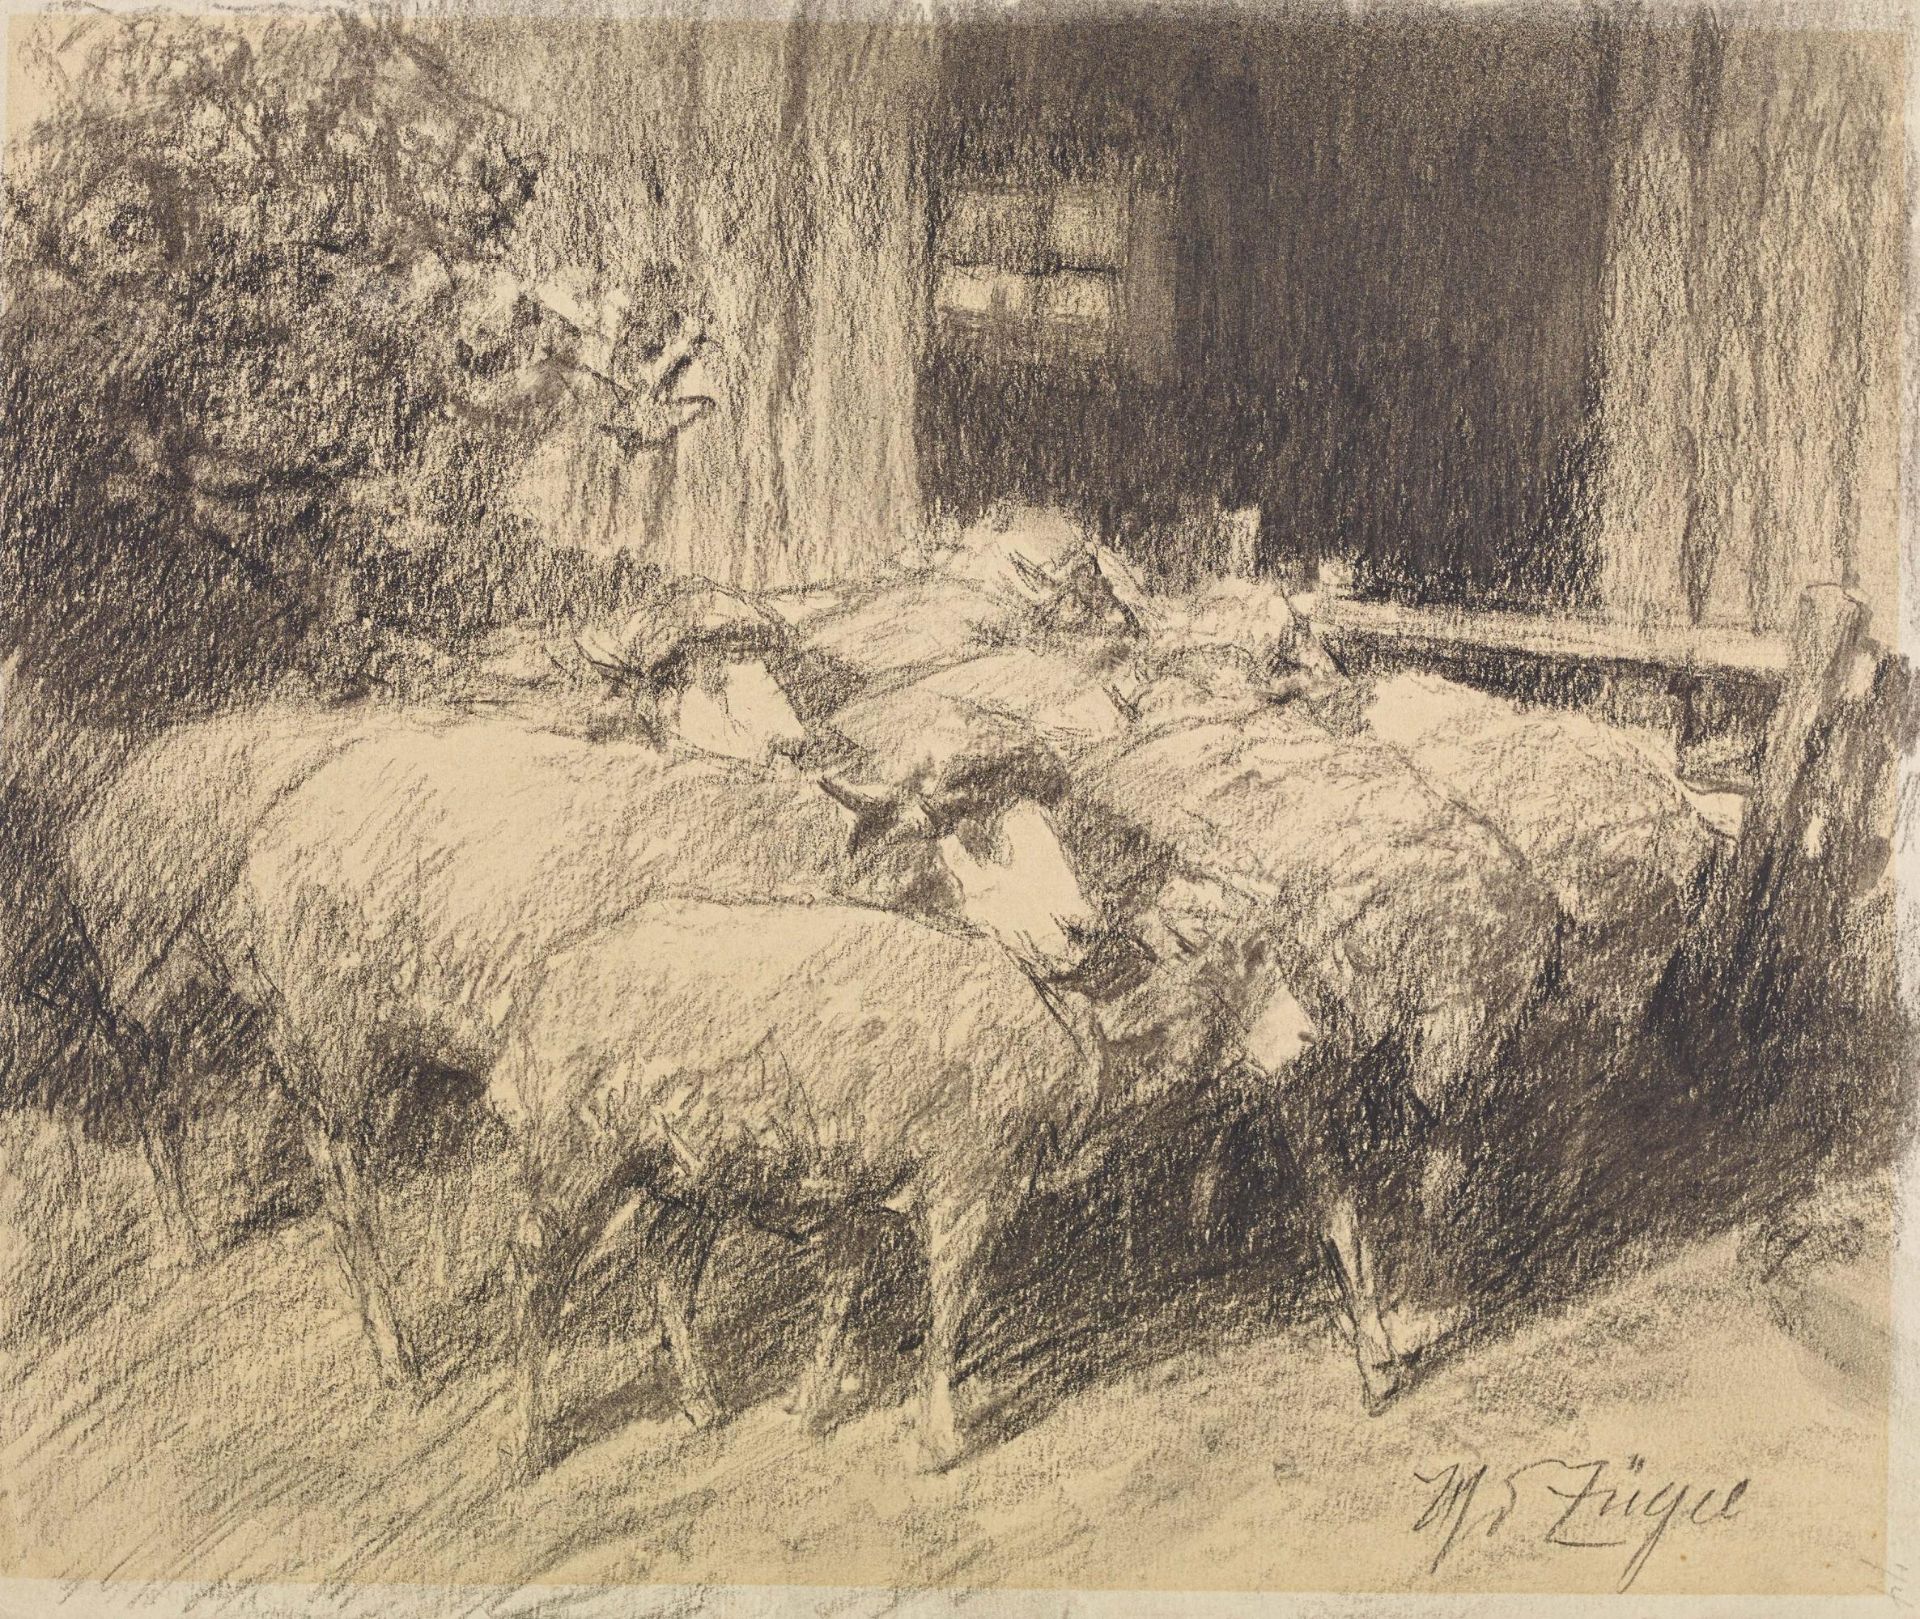 Heinrich von Zügel: Two charcoal drawings: A Yoke of Oxen / Sheep in Front of the Barn Door - Image 4 of 5